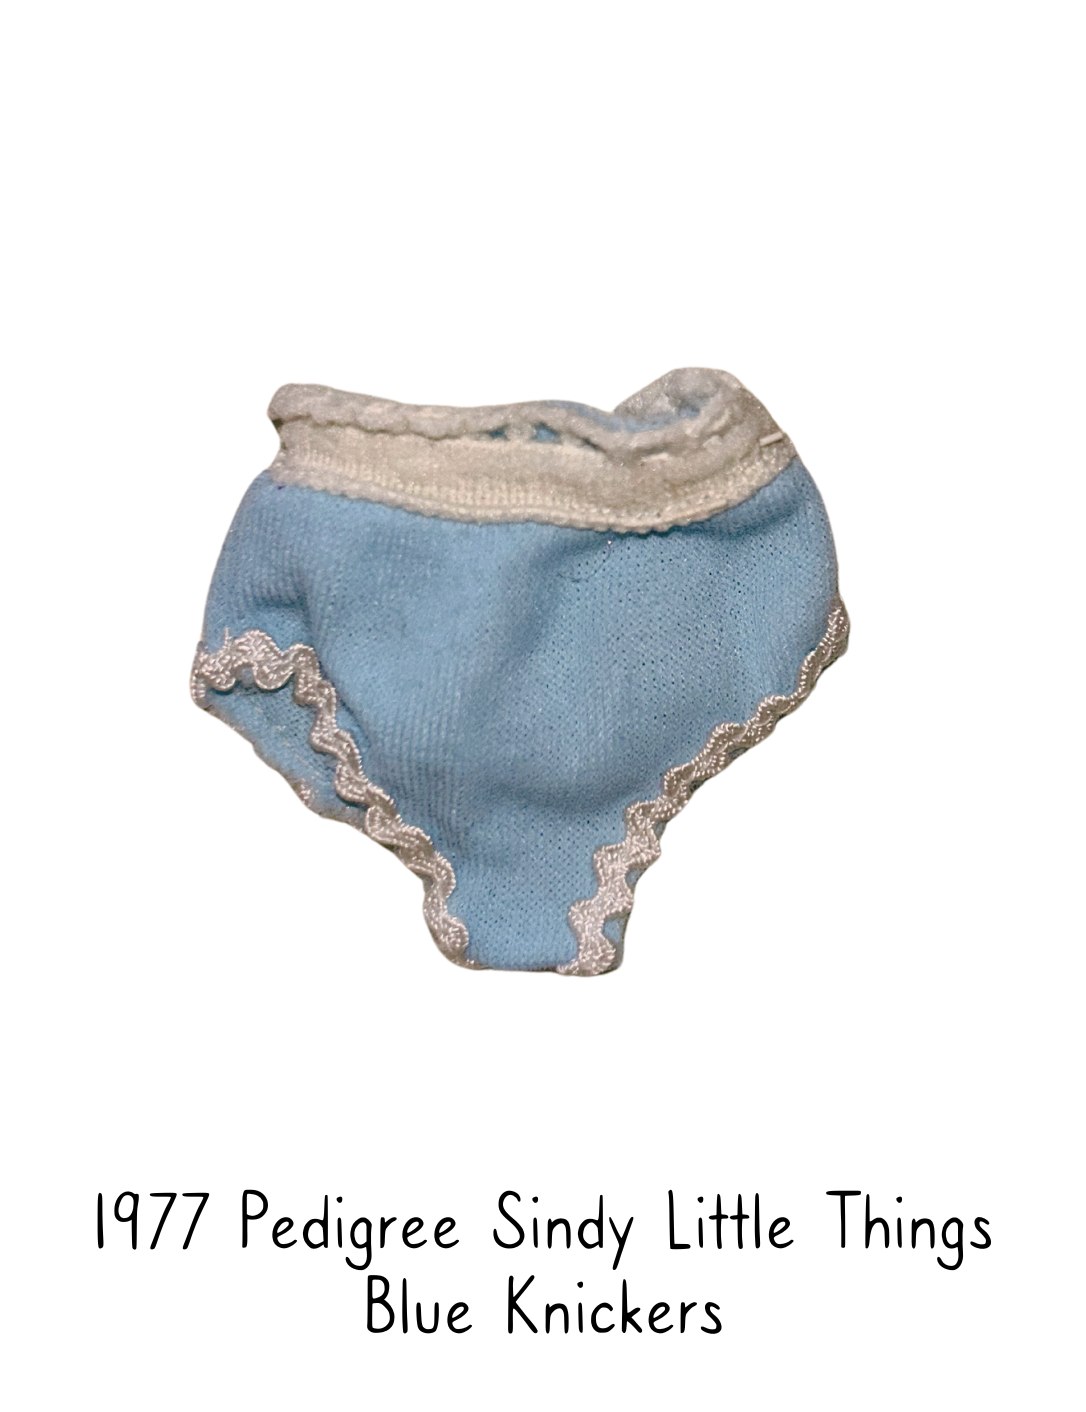 1977 Pedigree Sindy Fashion Doll Little Things Lingerie Blue Knickers